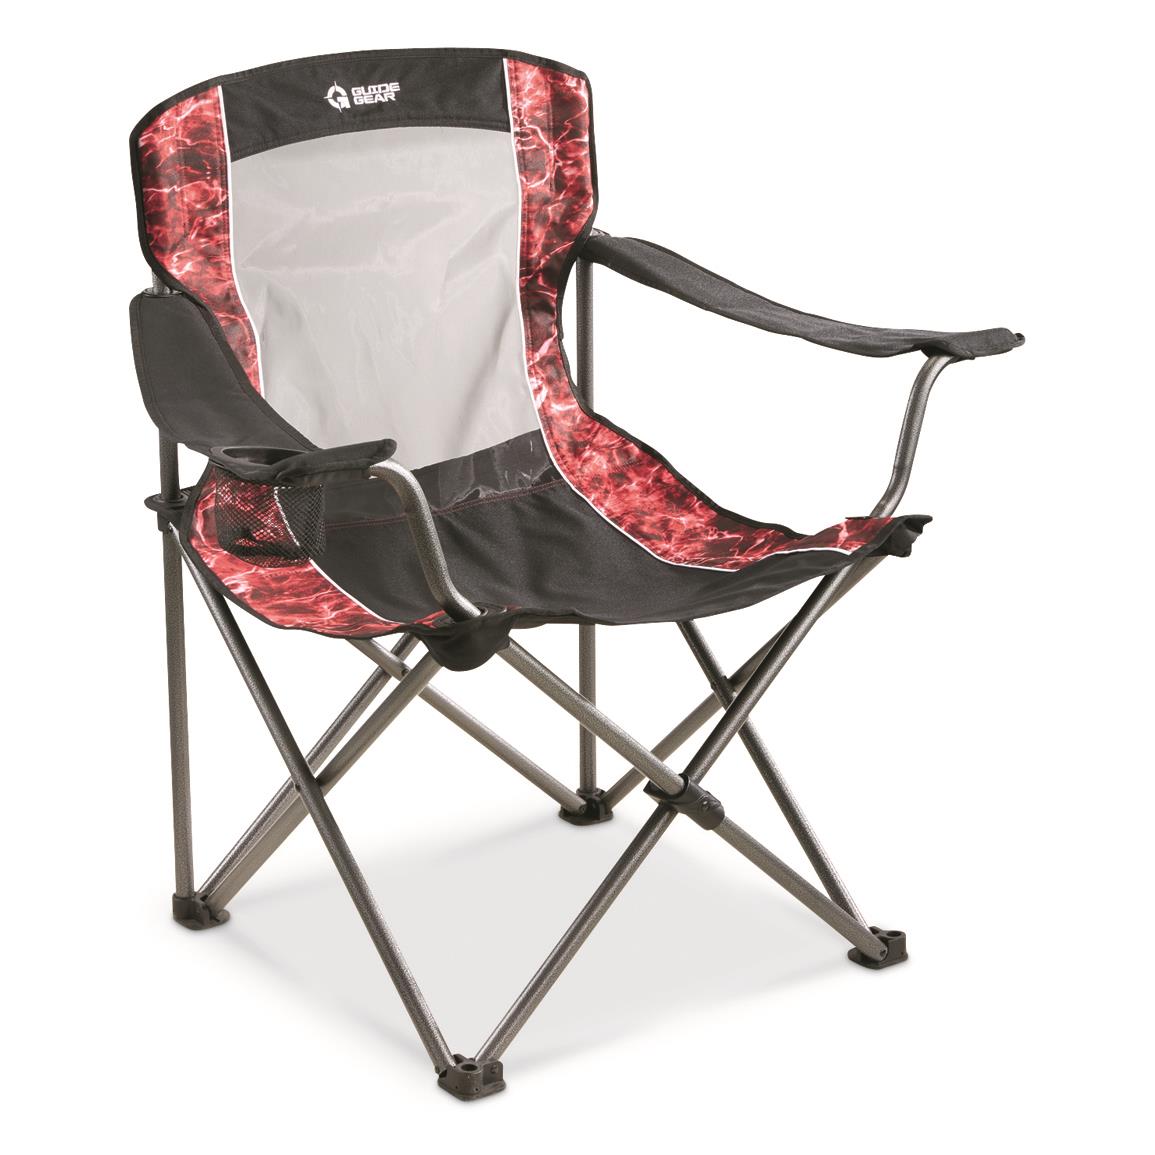 Guide Gear Oversized Quad Camping Chair, 500-lb. Capacity, Mossy Oak